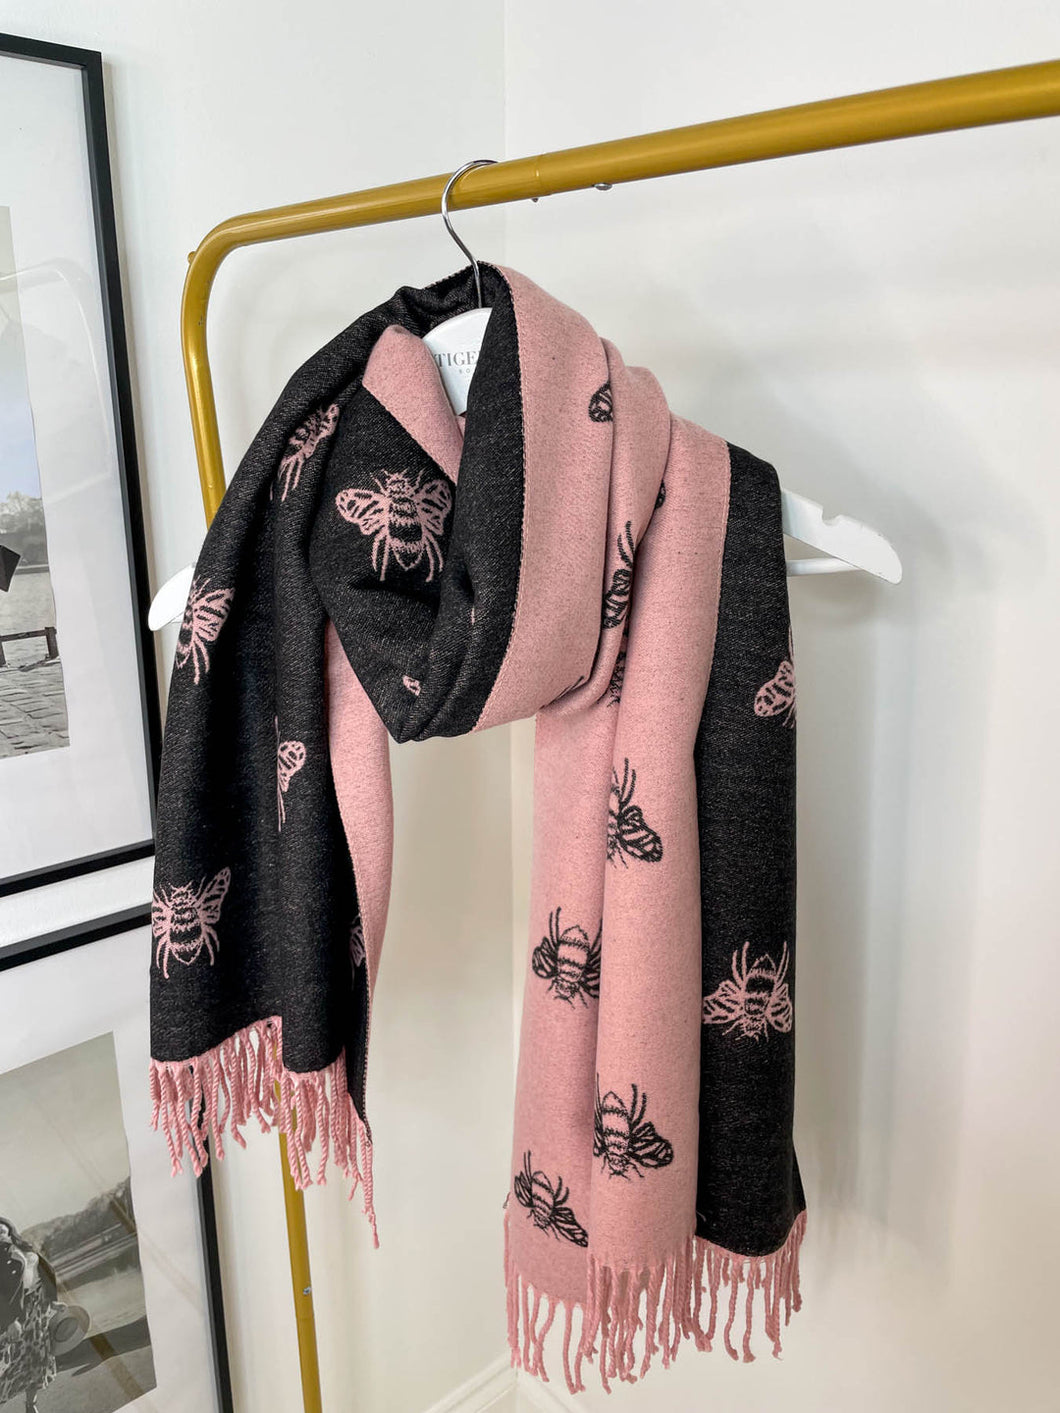 Cashmere Bees Scarf - Pink/Black